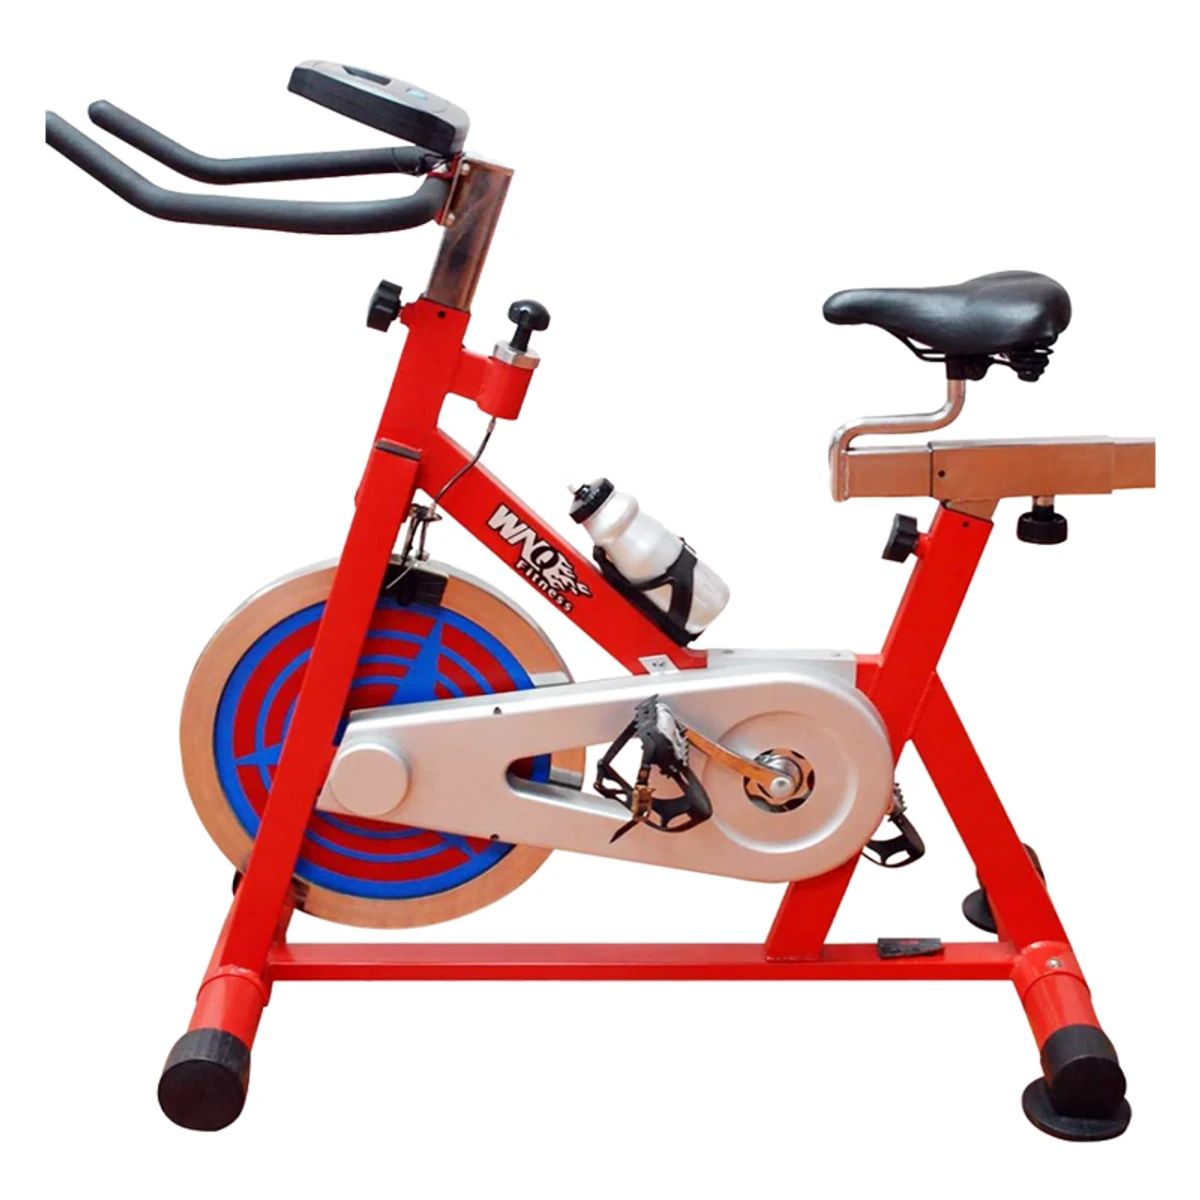 WNQ-318M1 Spin Bike Exercise Cycle for Home Gym